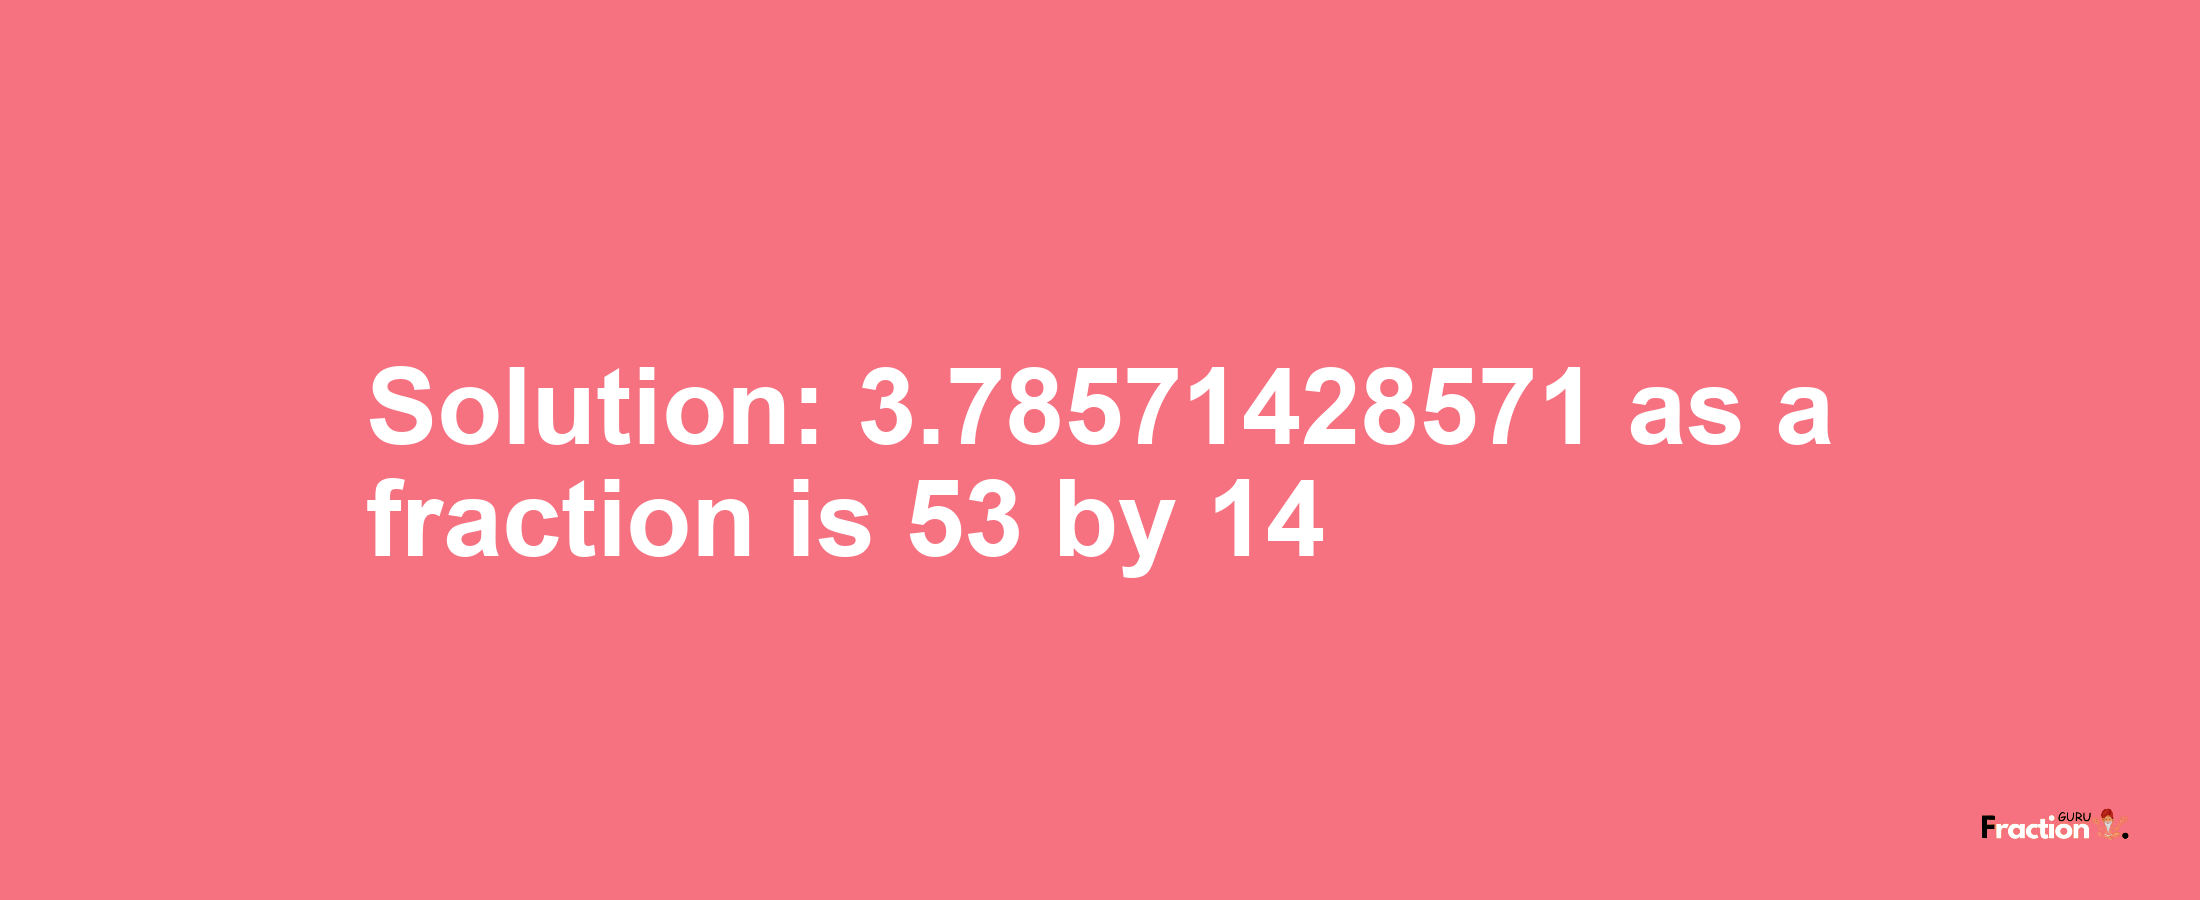 Solution:3.78571428571 as a fraction is 53/14